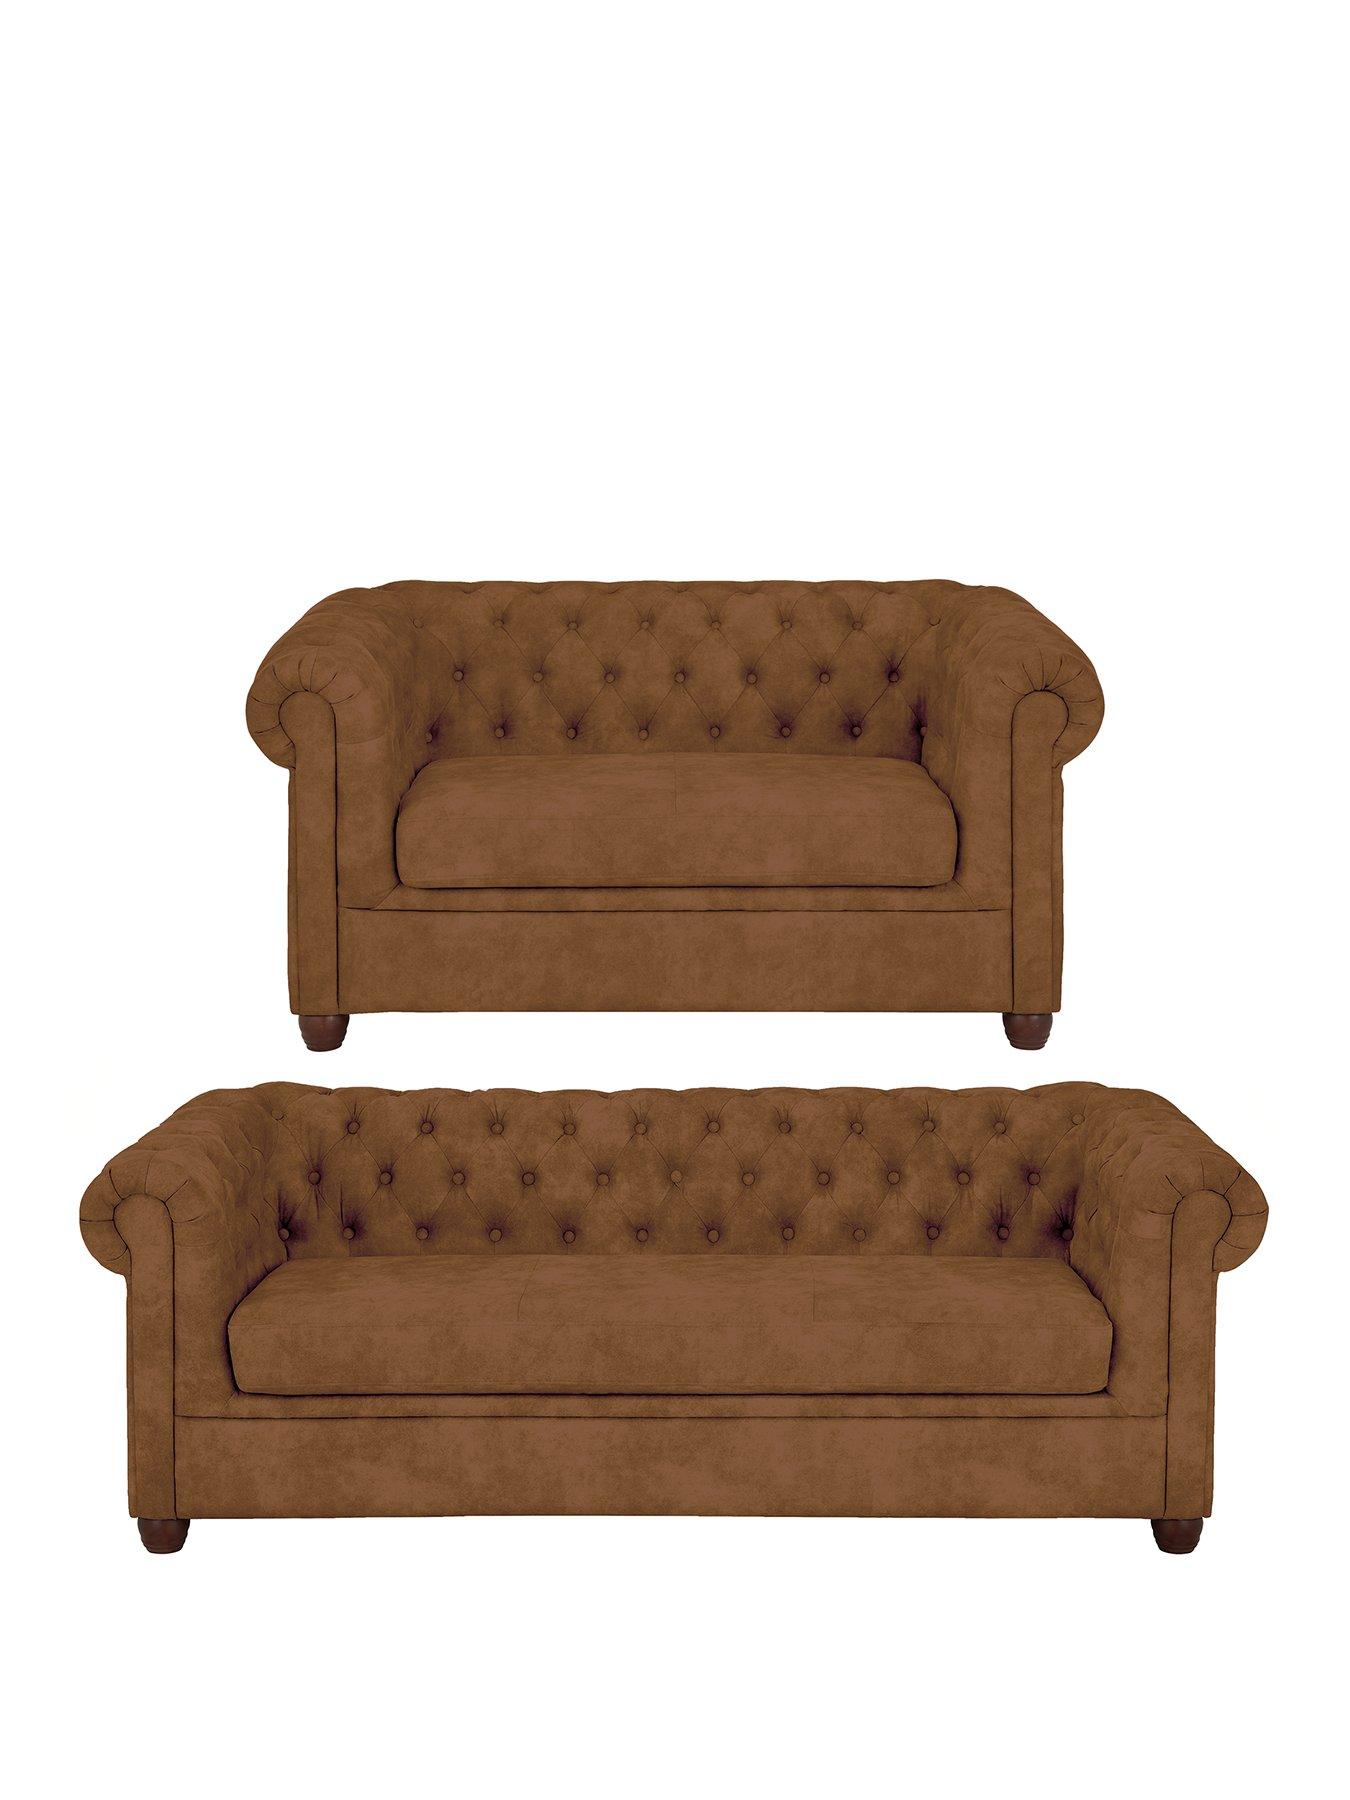 Details about   dark brown leather couch 